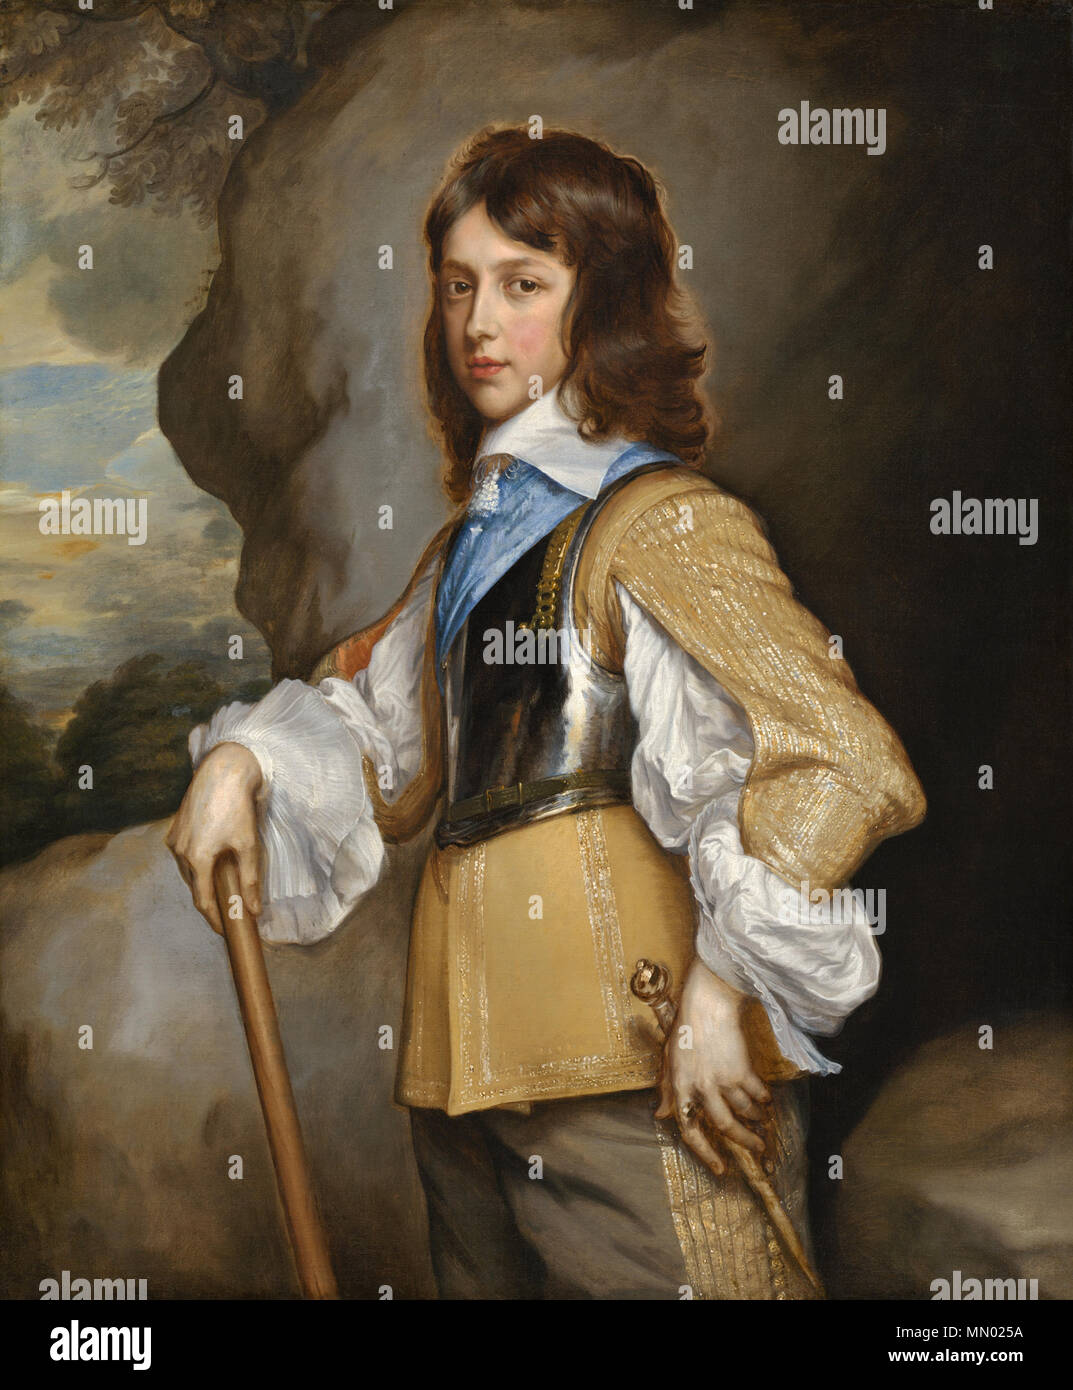 Painting; oil on canvas; overall: 104.8 x 87 cm (41 1/4 x 34 1/4 in.) framed: 128.91 x 111.13 x 11.43 cm (50 3/4 x 43 3/4 x 4 1/2 in.); Henry, Duke of Gloucester Stock Photo